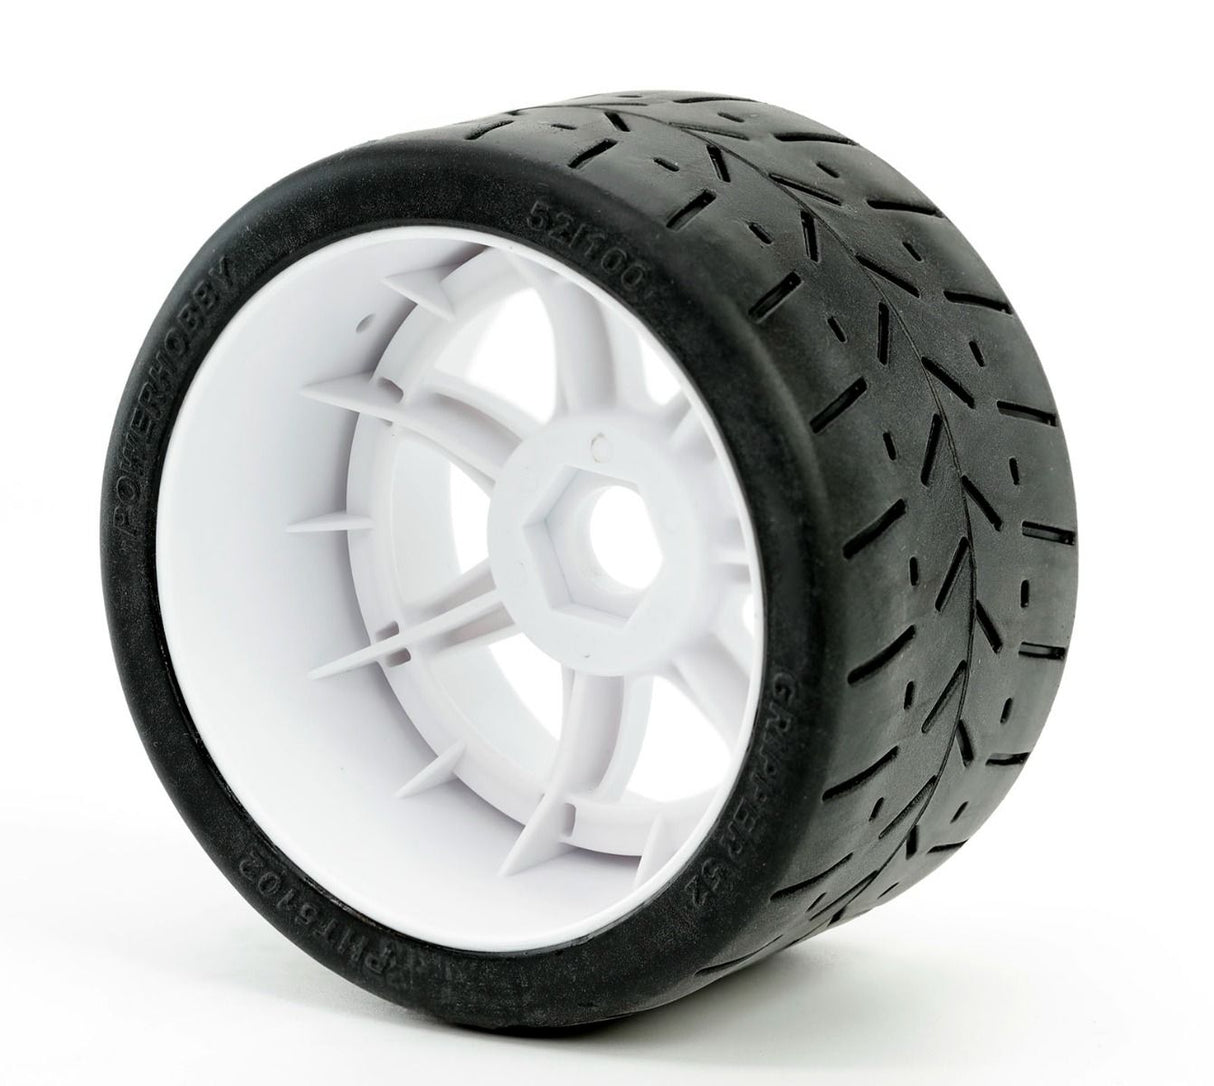 Powerhobby pht5102 1/8 Gripper 54/100 Belted Mounted Tires 17mm White Wheels